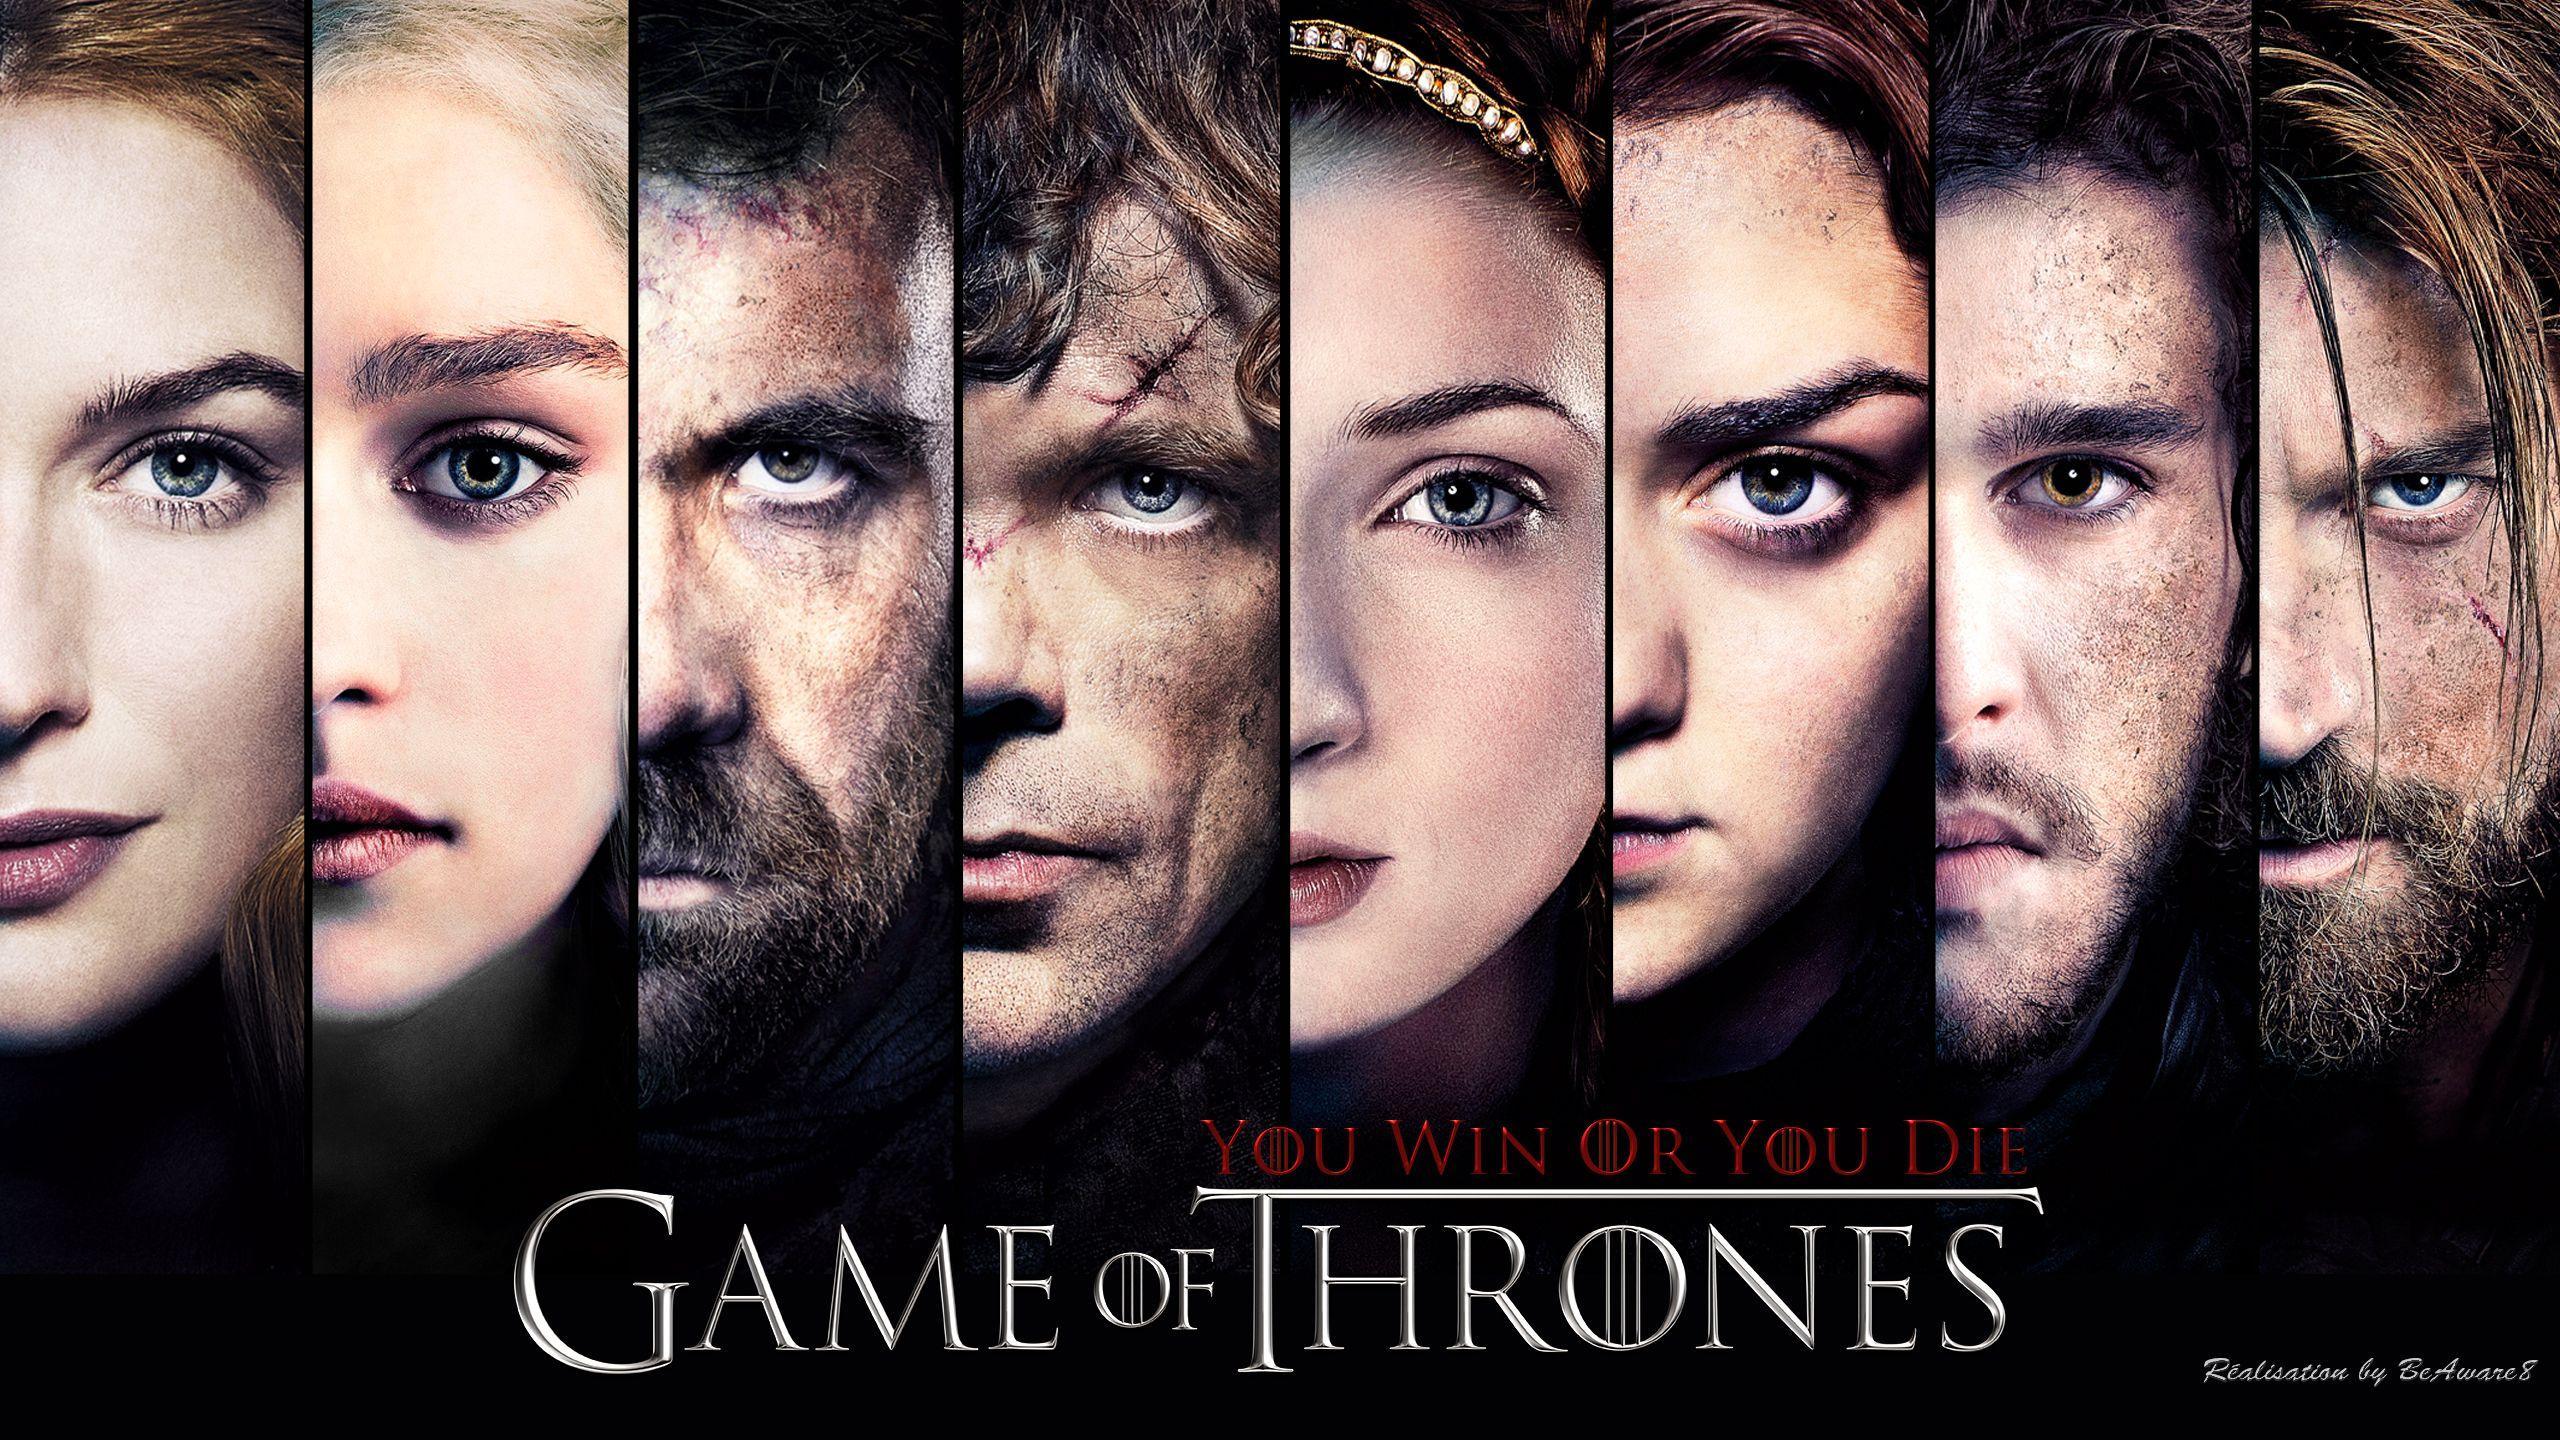 Game Of Thrones Wallpapers For Iphone And Mobile - Game Of Thrones Hd Poster - HD Wallpaper 